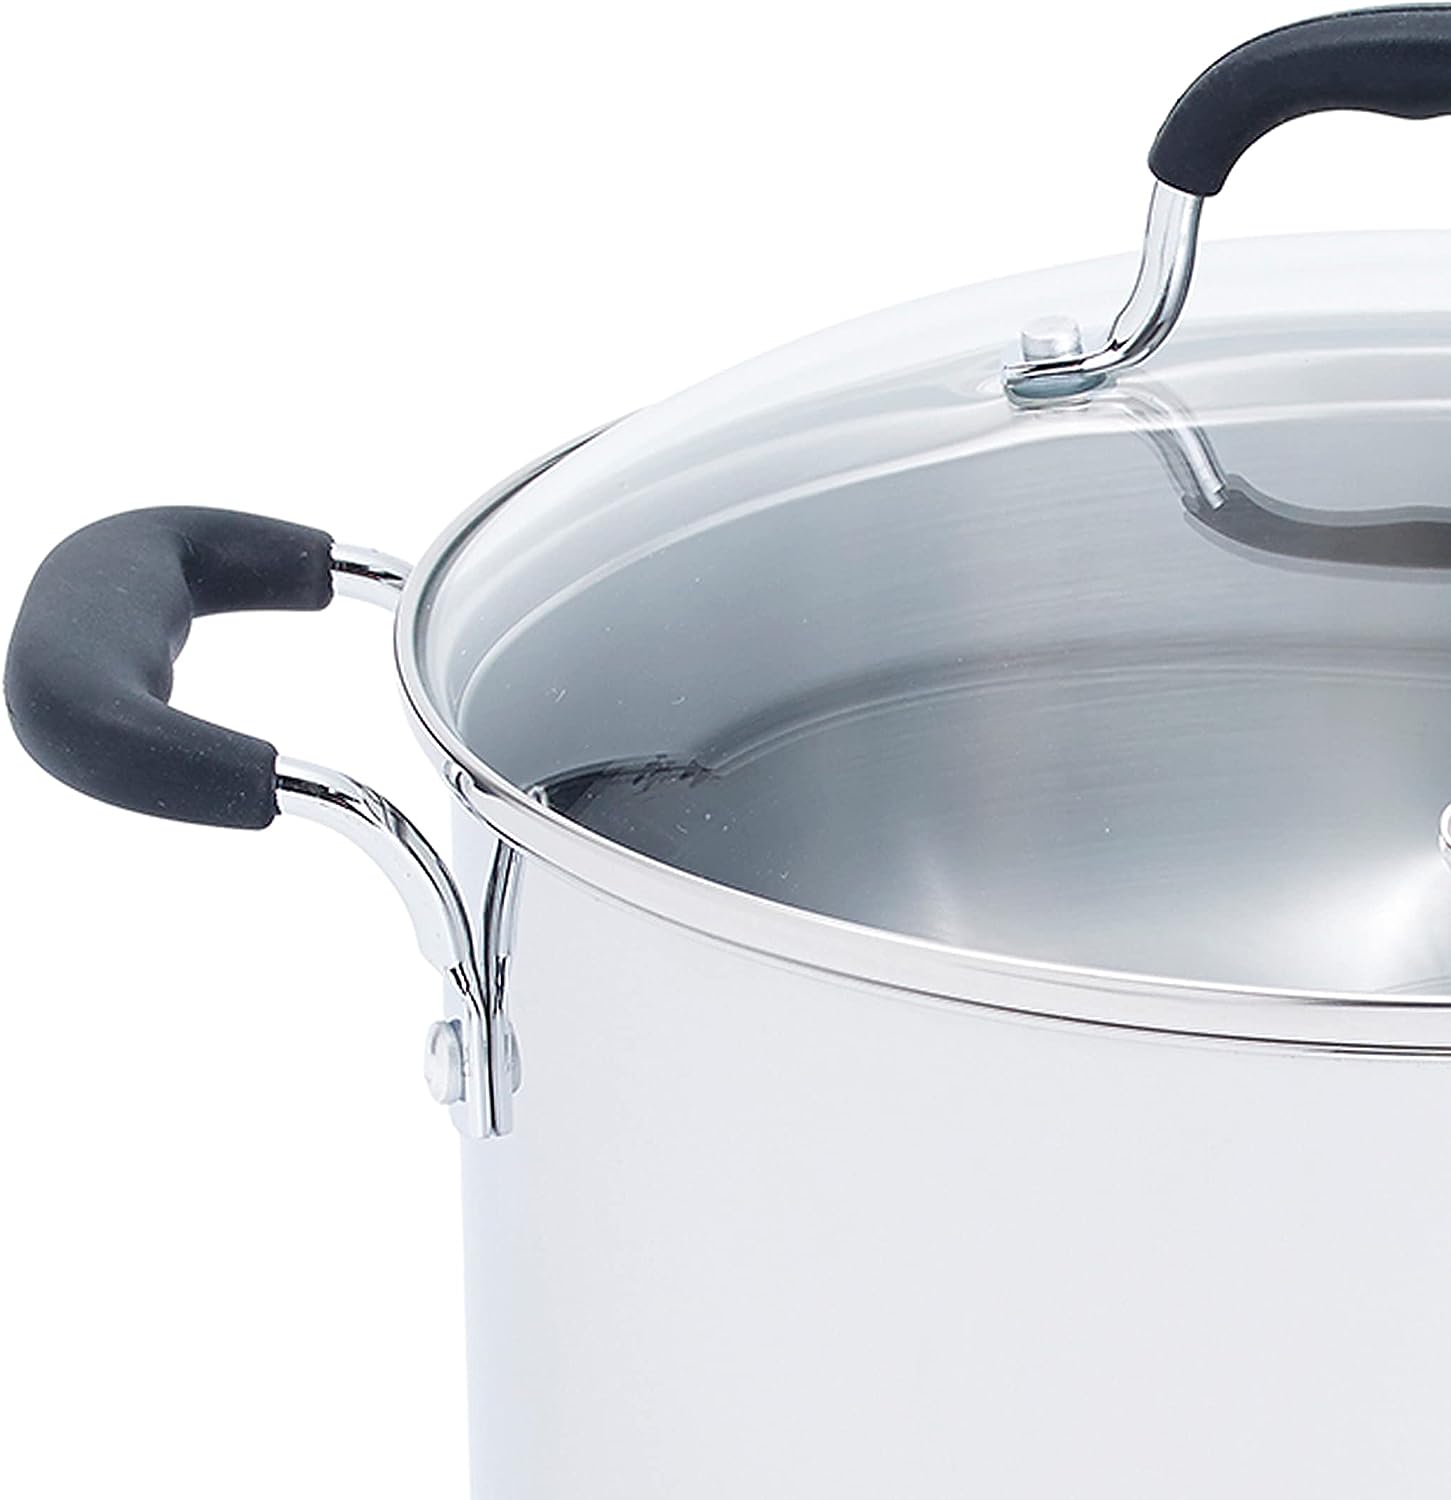 https://bigbigmart.com/wp-content/uploads/2023/10/T-fal-Specialty-Stainless-Steel-Stockpot-12-Quart-Oven-Broiler-Safe-350F-Pots-and-Pans-Cookware-Silver1.jpg